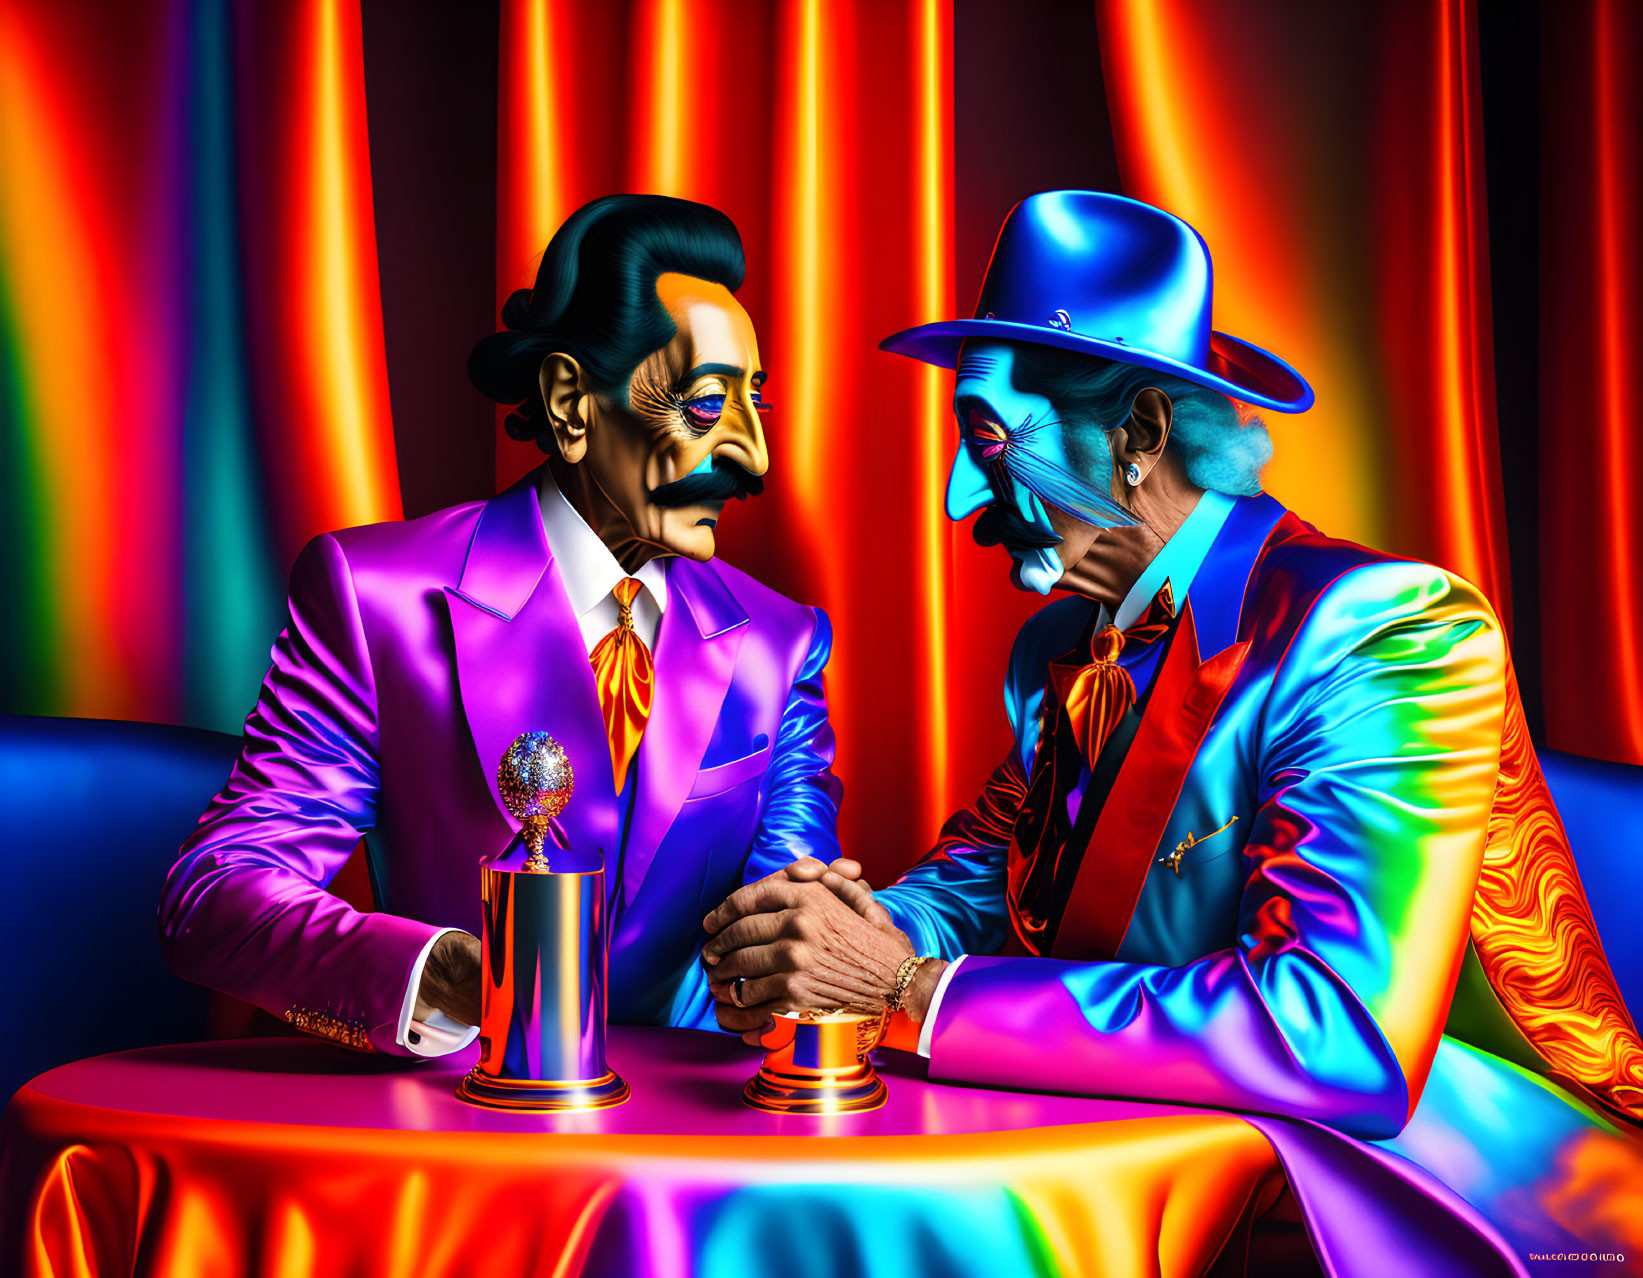 Colorful Caricatures Arm Wrestling Under Dramatic Lighting